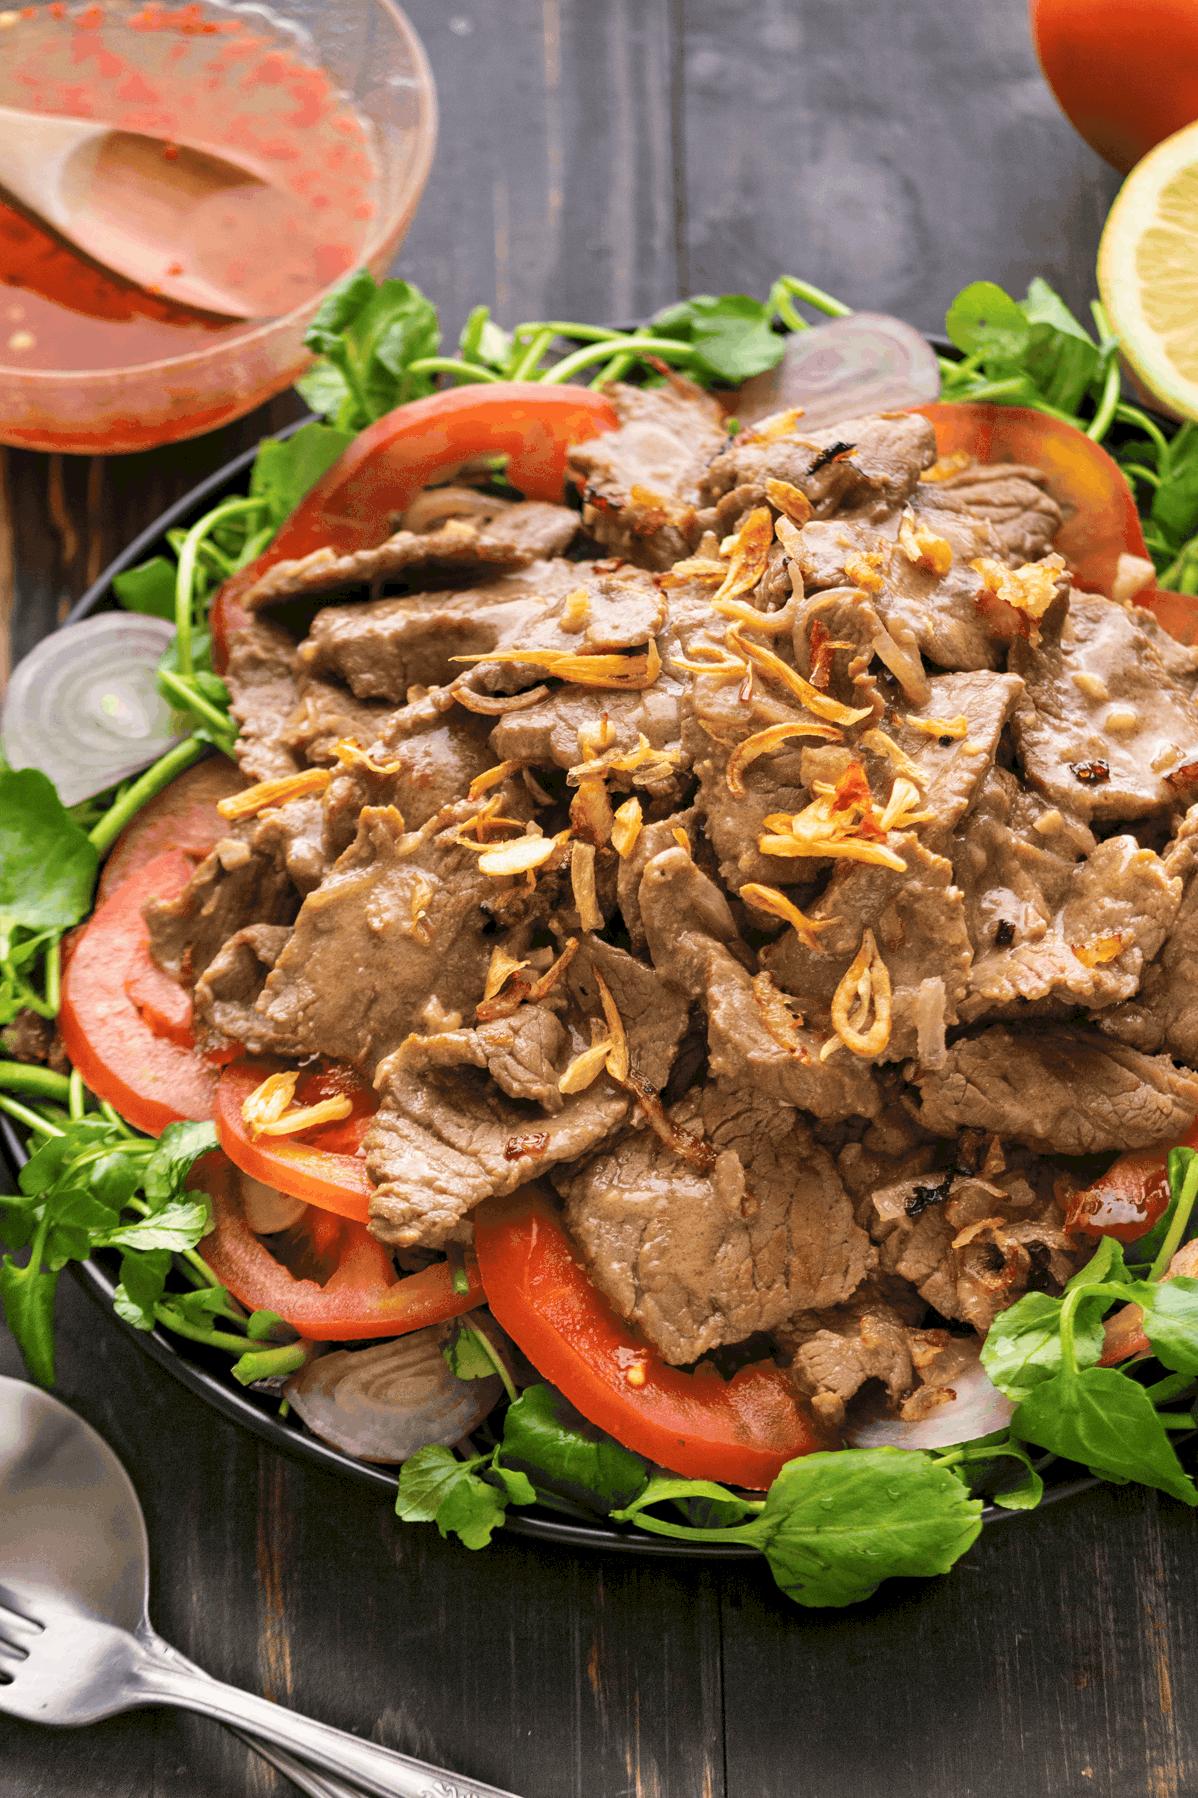  Impress your guests with the colorful and tasty Vietnamese Beef Salad.